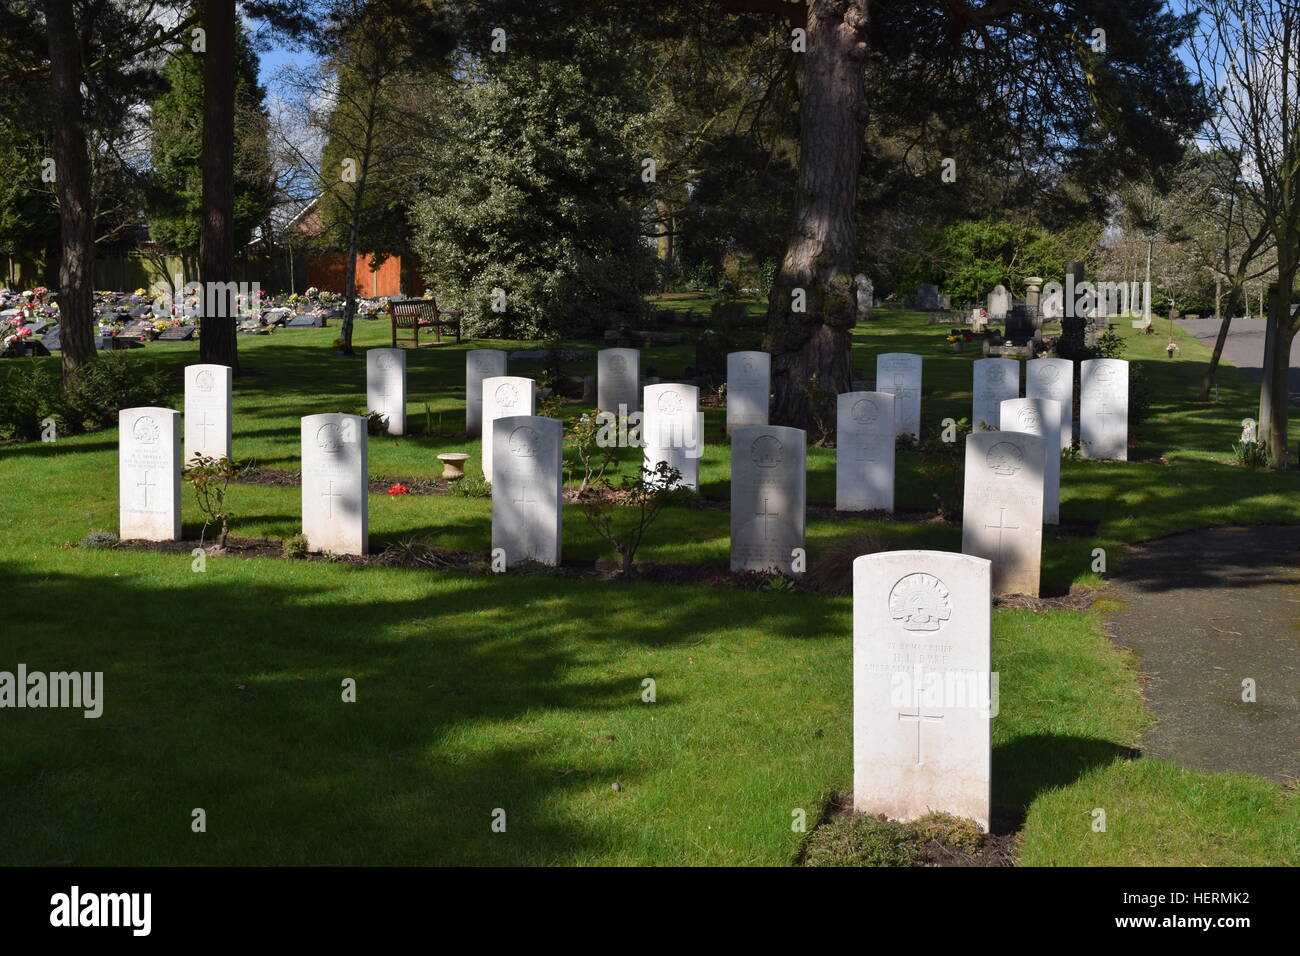 Australian Imperial Force (AIF) War Graves in Stourbridge Cemetery, England against a wooded/shaded background Stock Photo